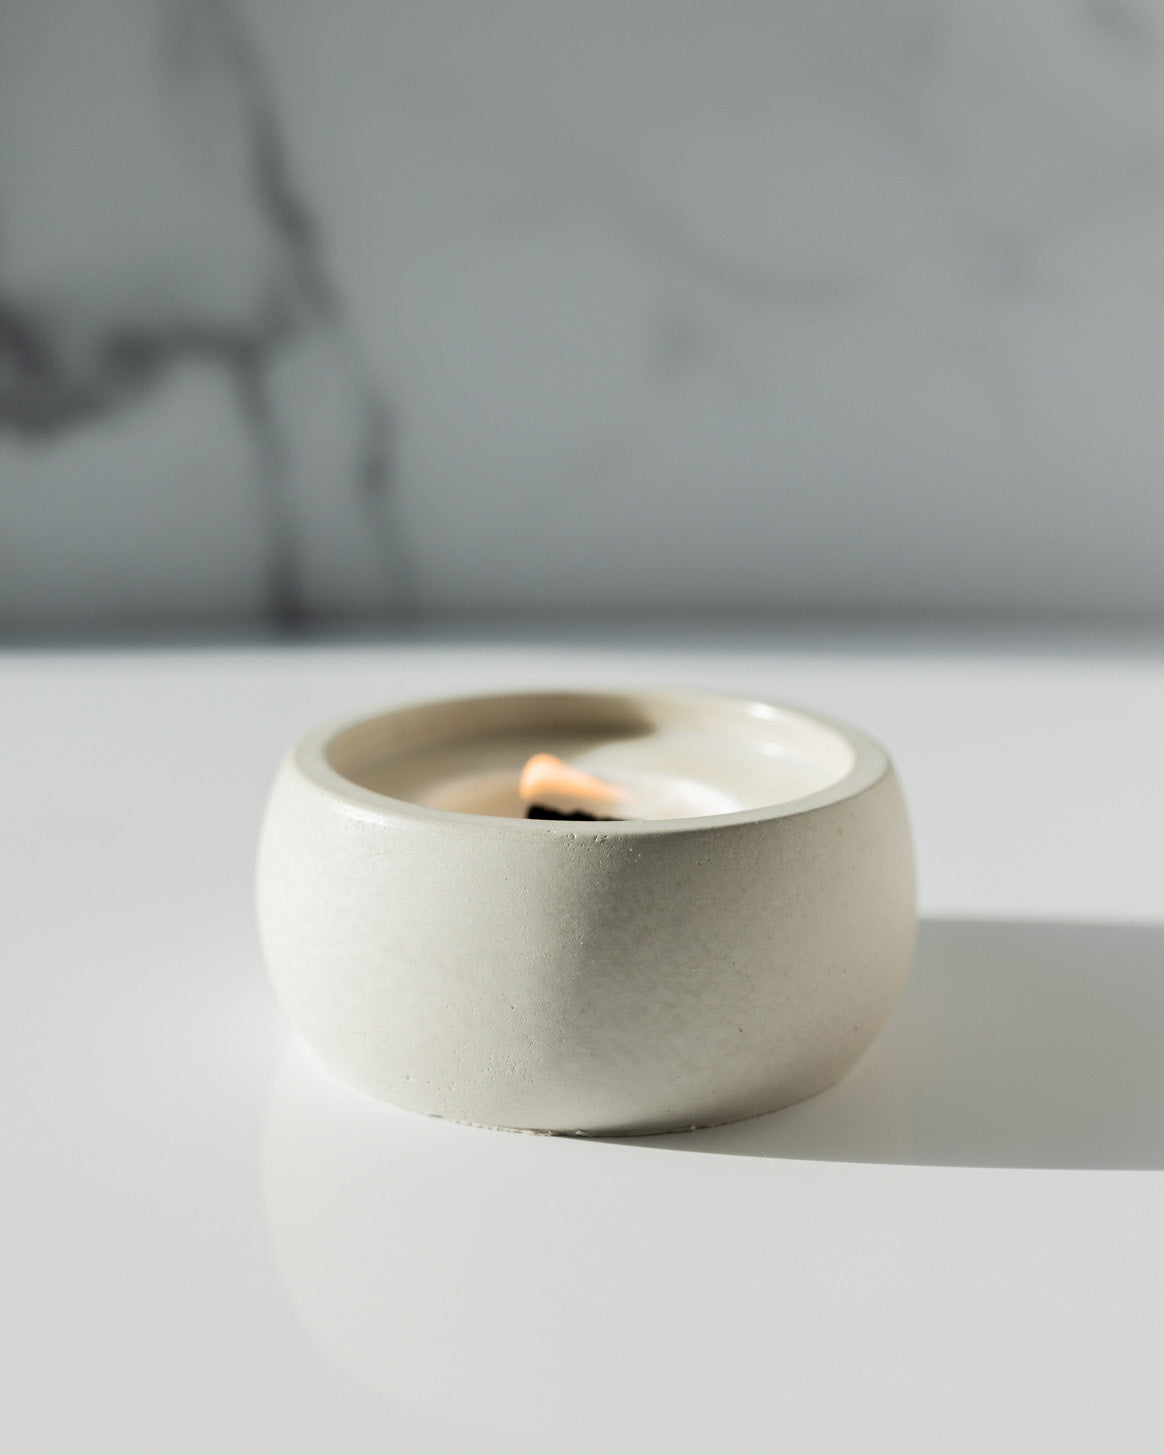 Good Vibes Coconut Soy Candle - Concrete Wooden Wick Vessel